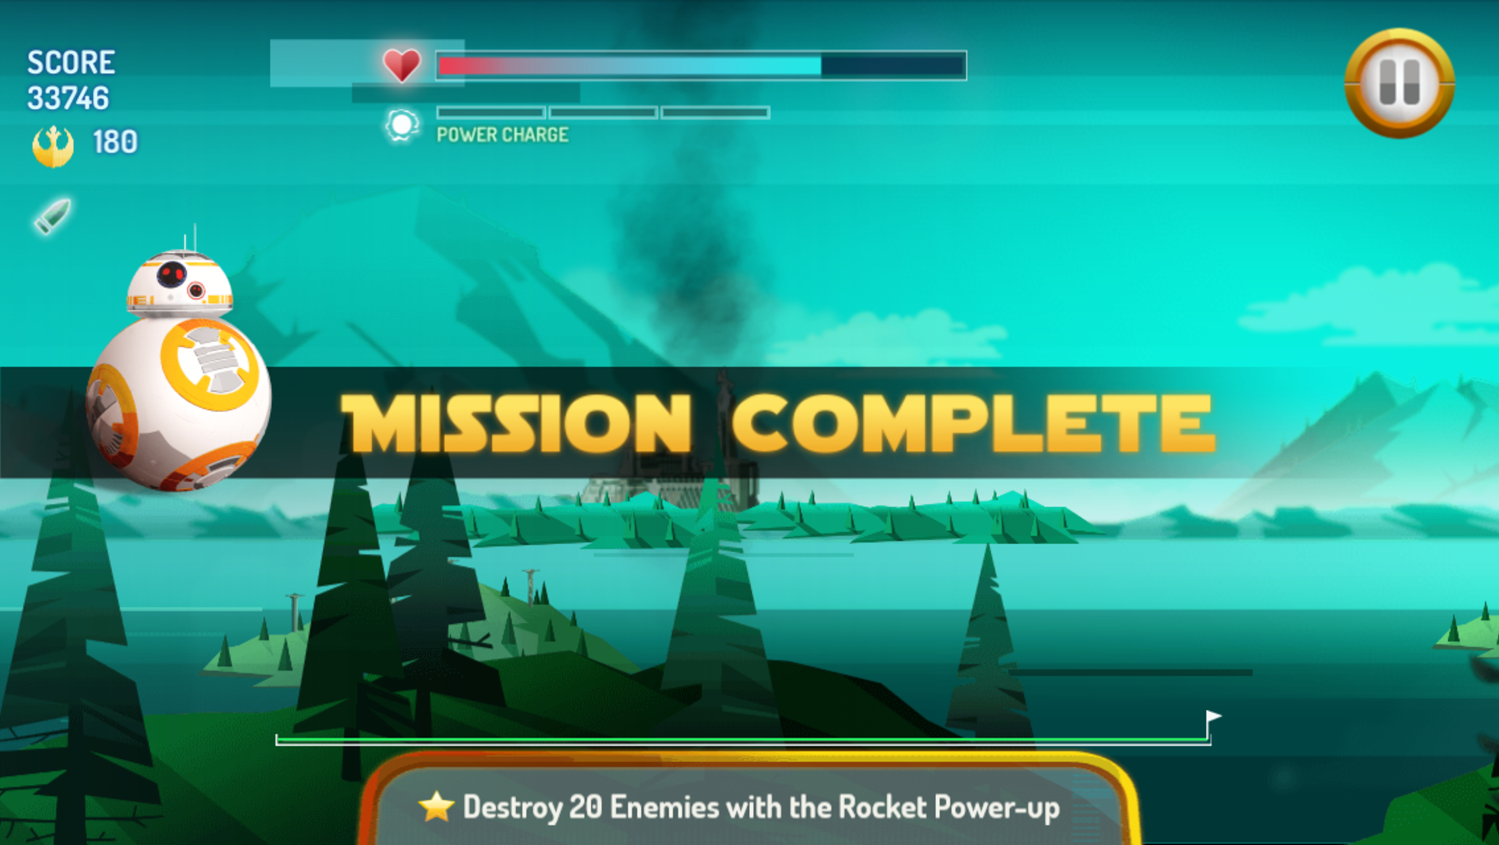 Star Wars X Wing Fighter Mission Complete Screenshot.